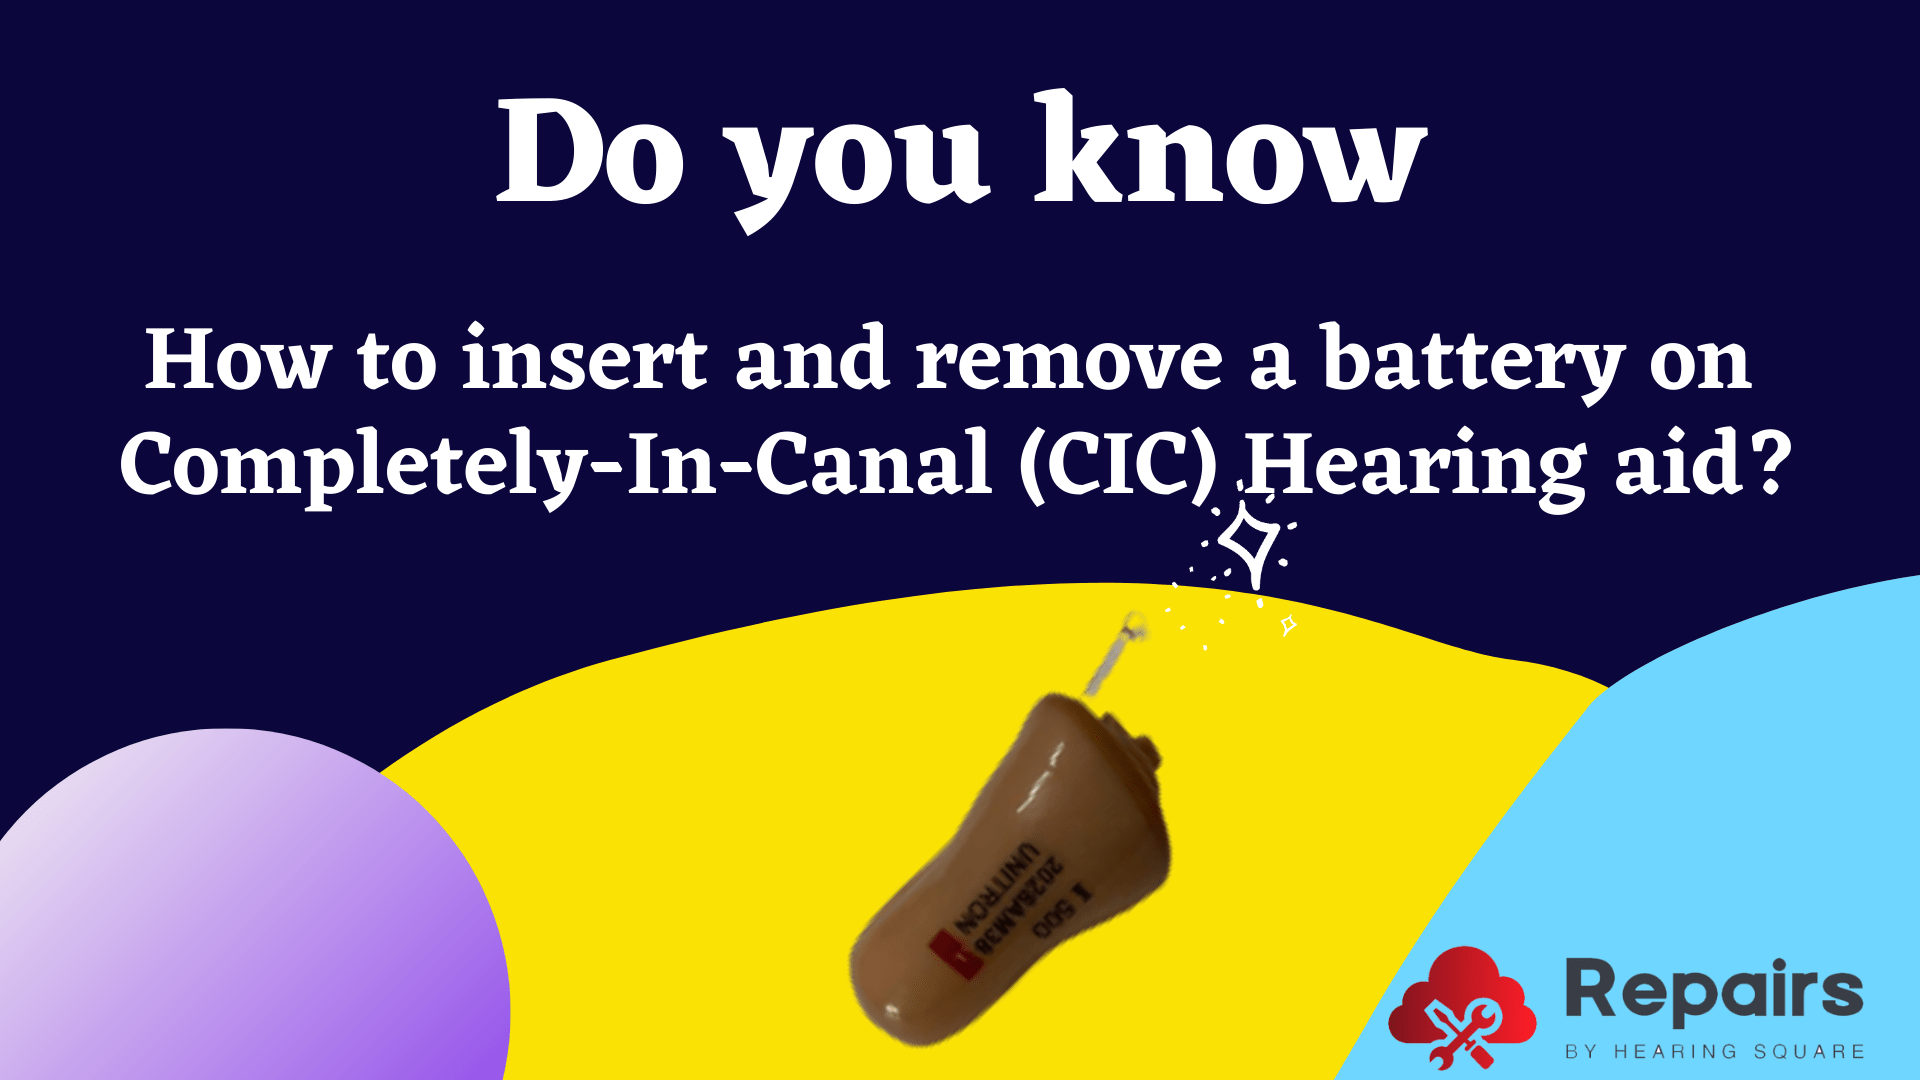 How to insert and remove a battery on Completely-In-Canal (CIC) Hearing aid